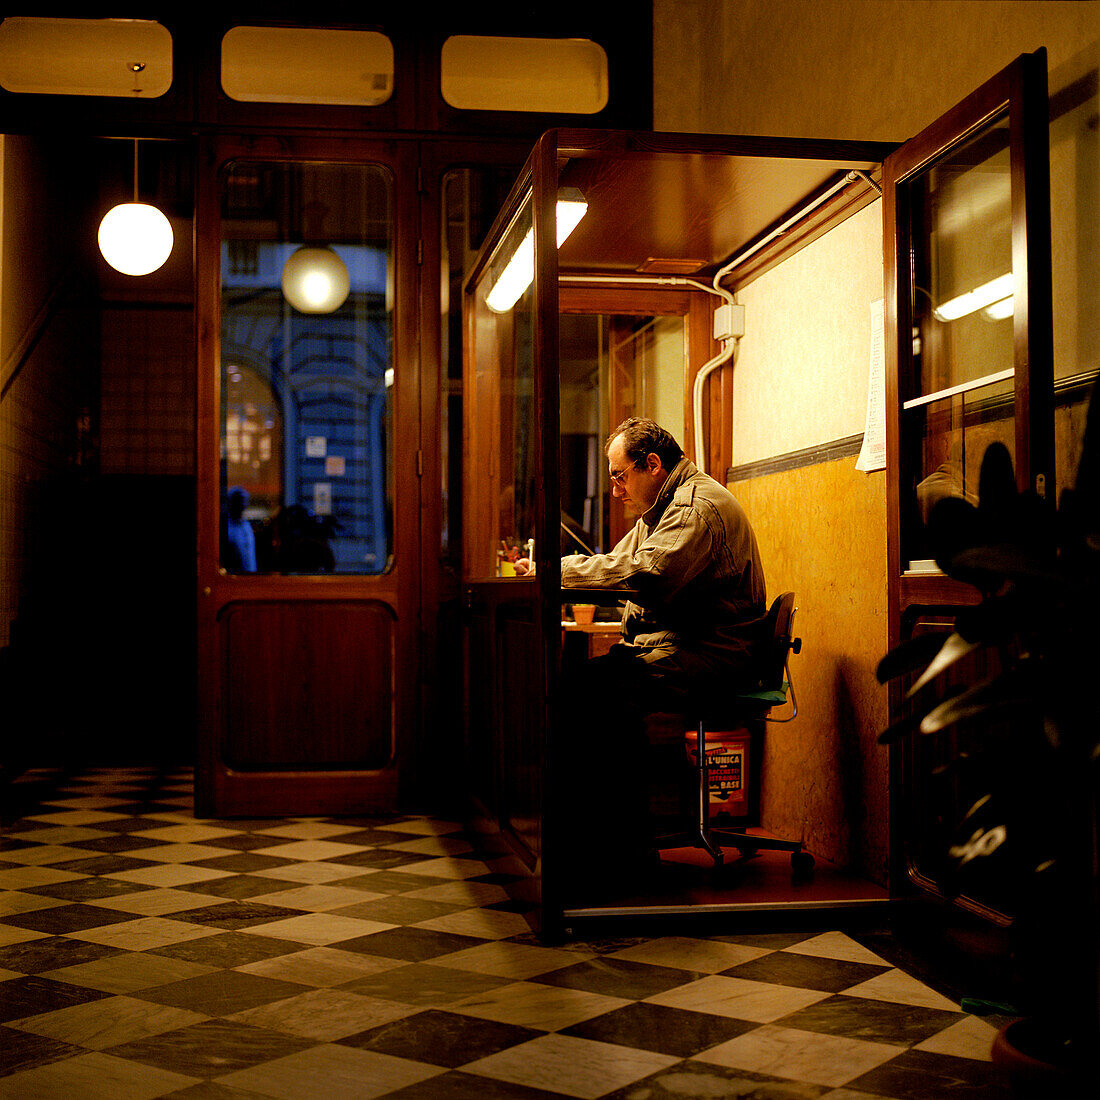 Doorman holding night watch at hotel entrance, Florence, Tuscany, Italy